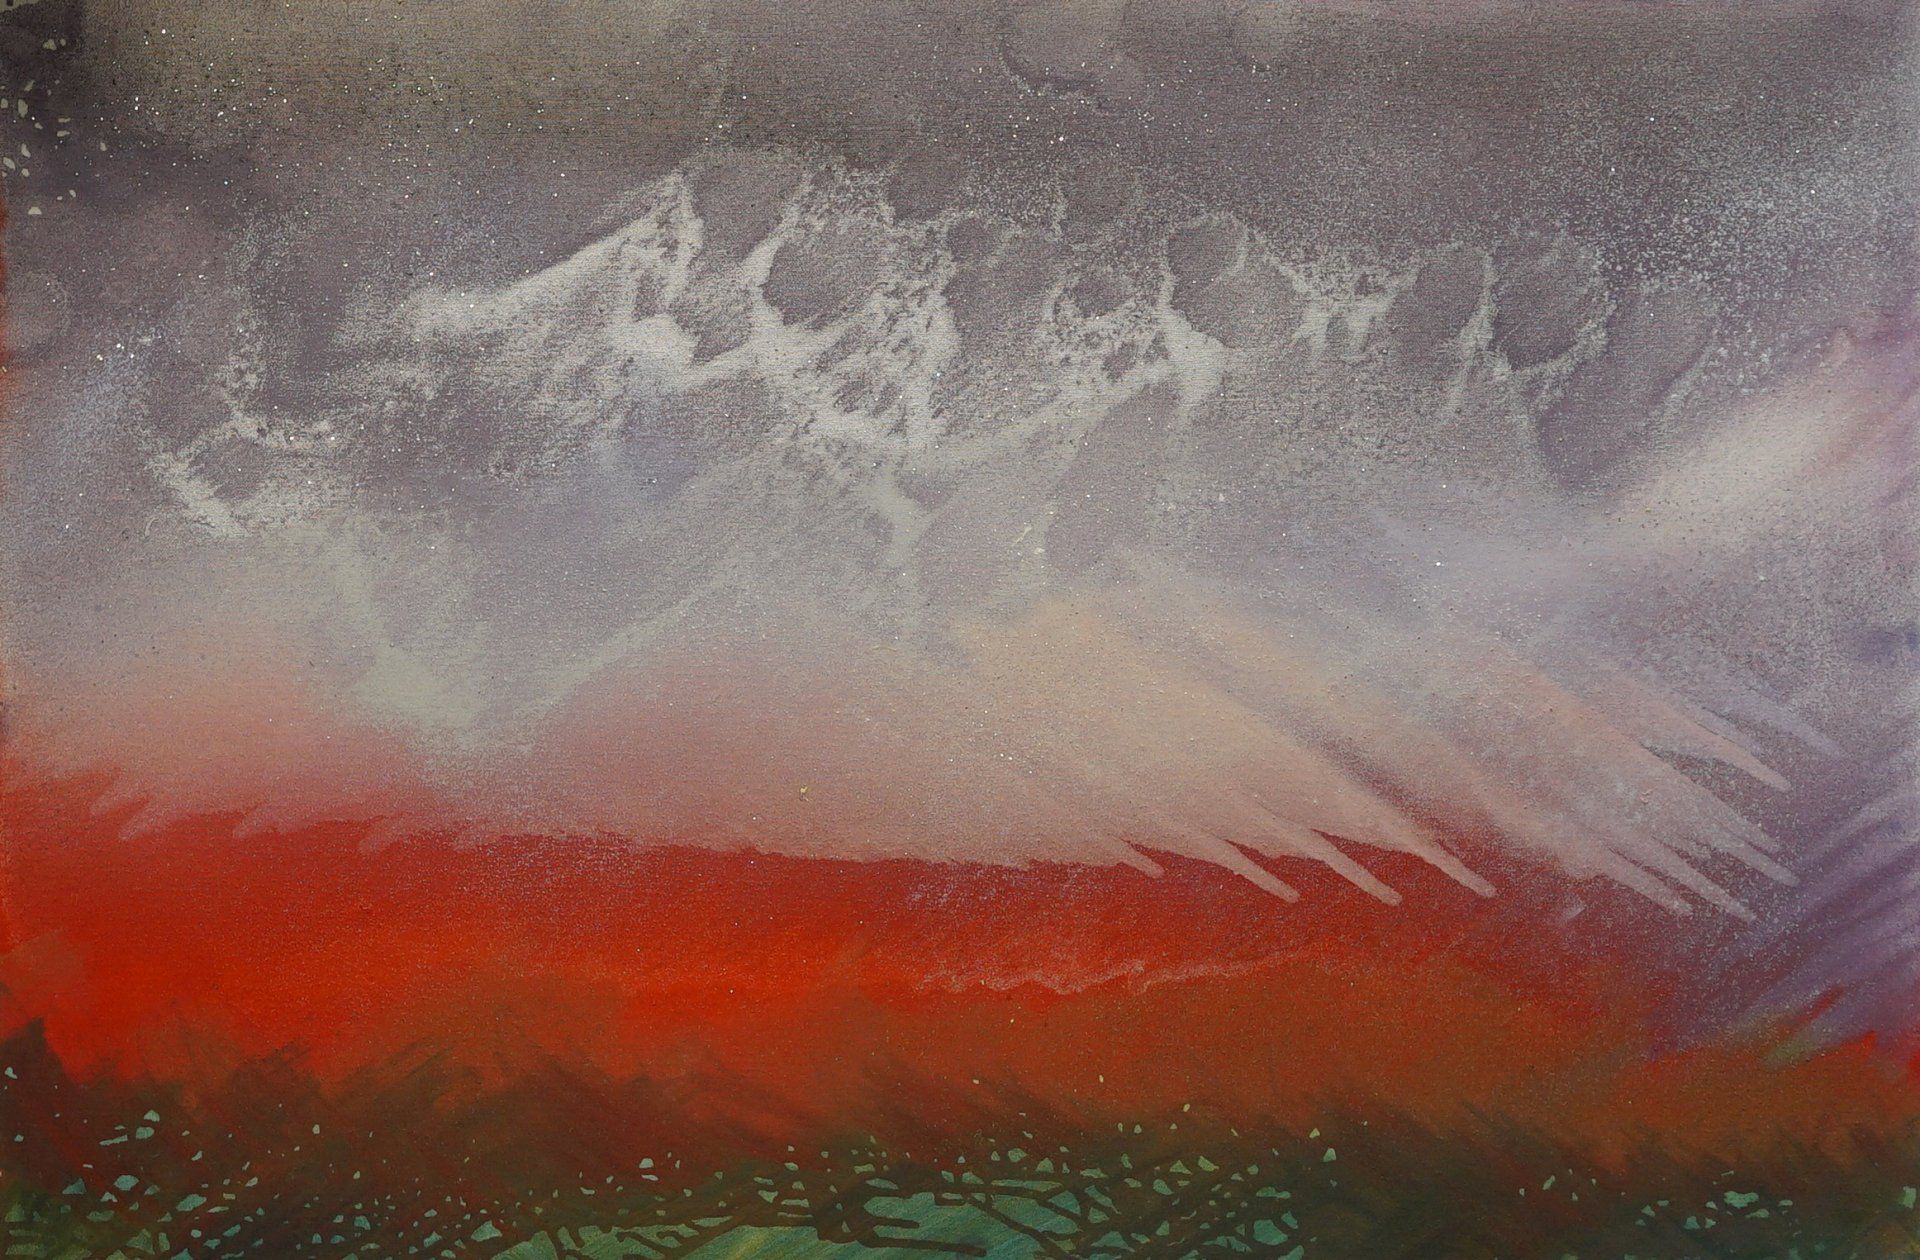 Fire on the Mountain   Bruno DaVenzia 2015, Oil on Canvas   Available on Artsy